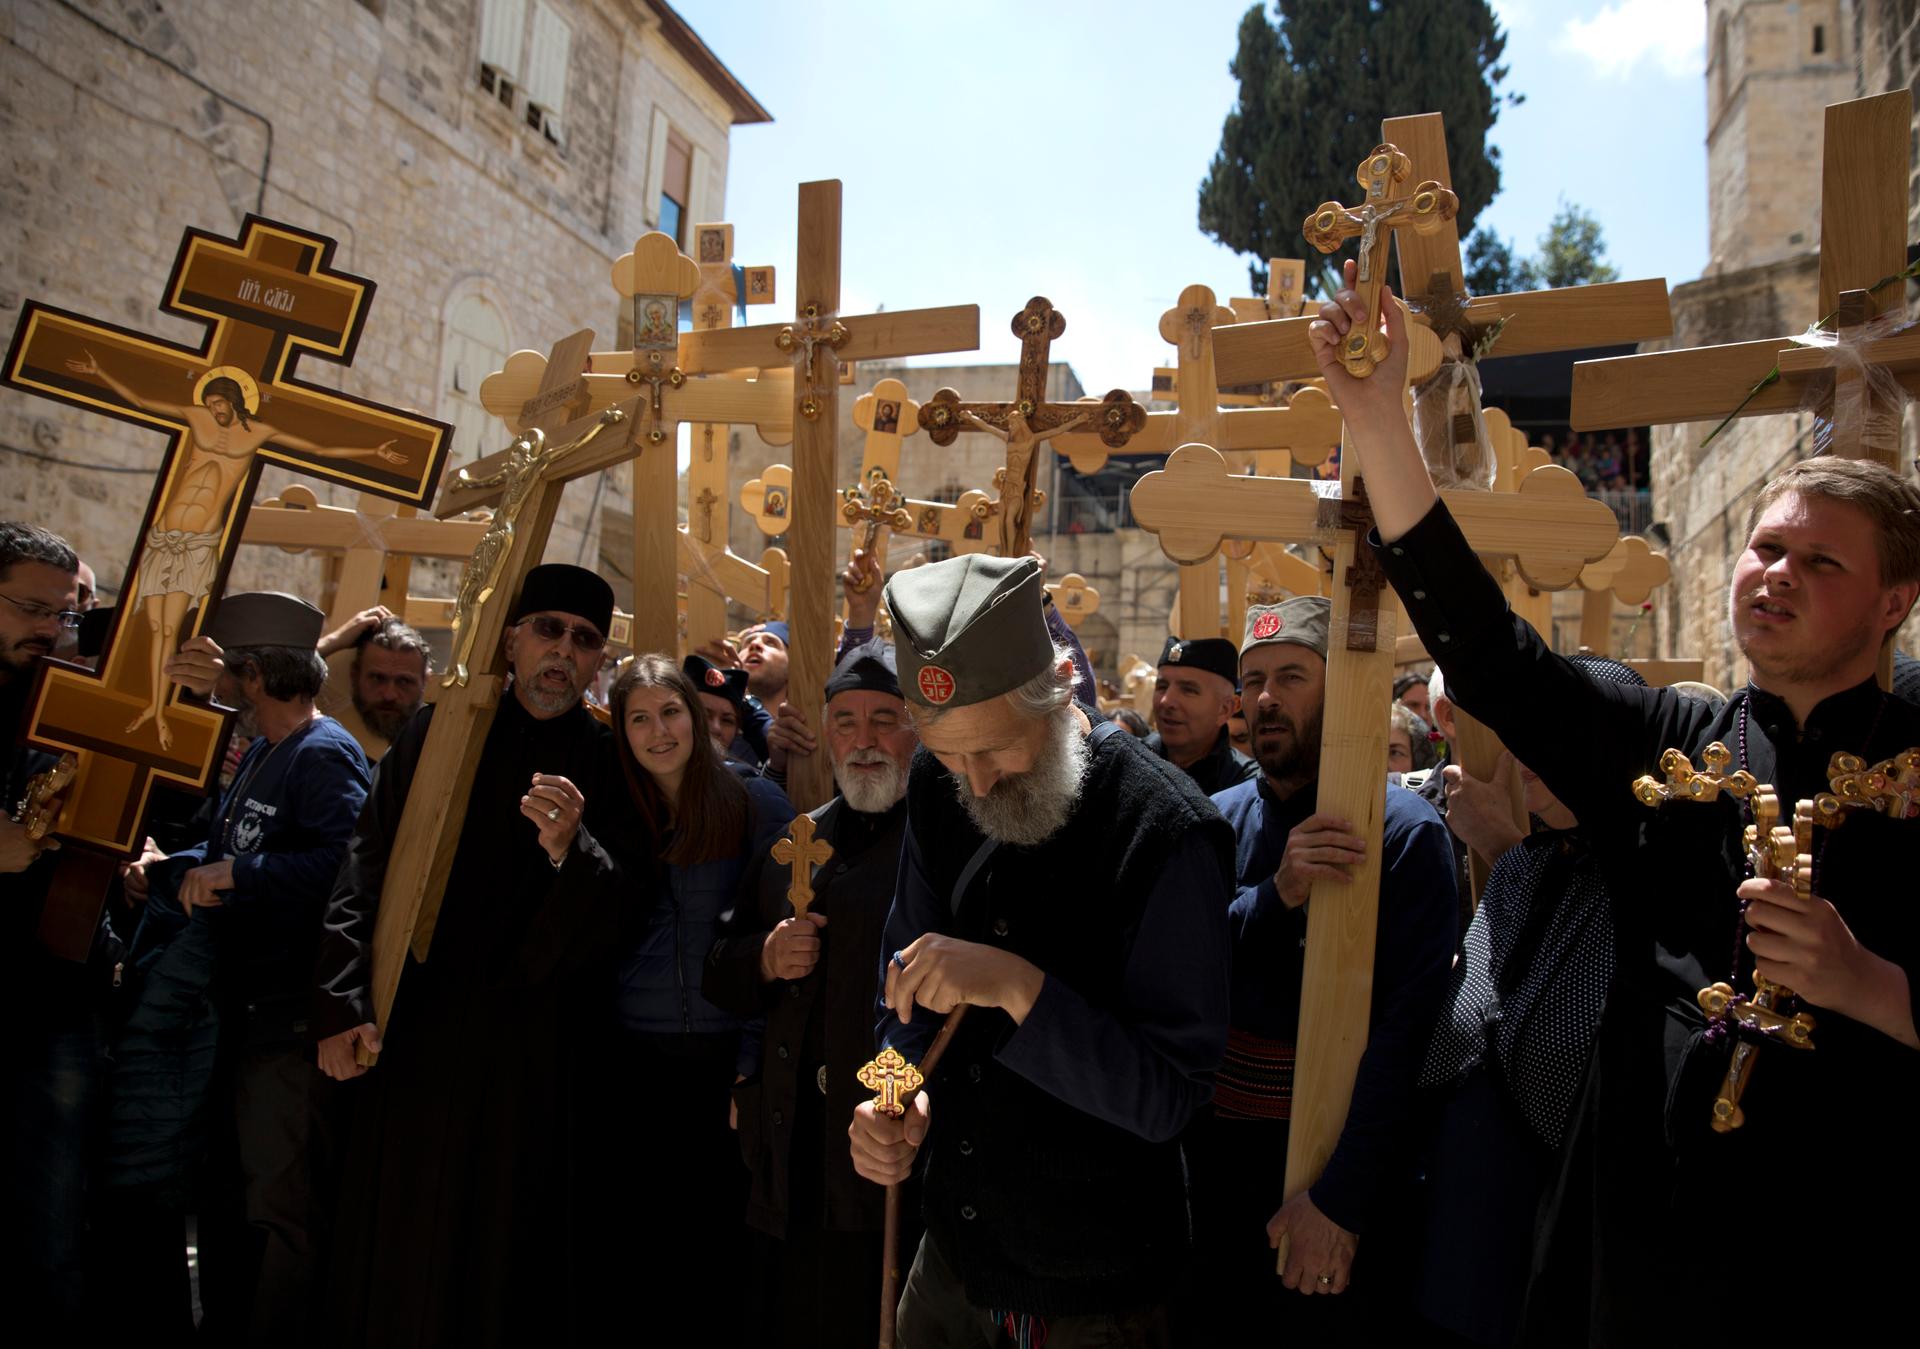 Christian pilgrims from Eritrea are seen amongst the thousands of pilgrims that came from all over the world and carried wooden crosses along Via Dolorosa, or “The Way of Sorrow.